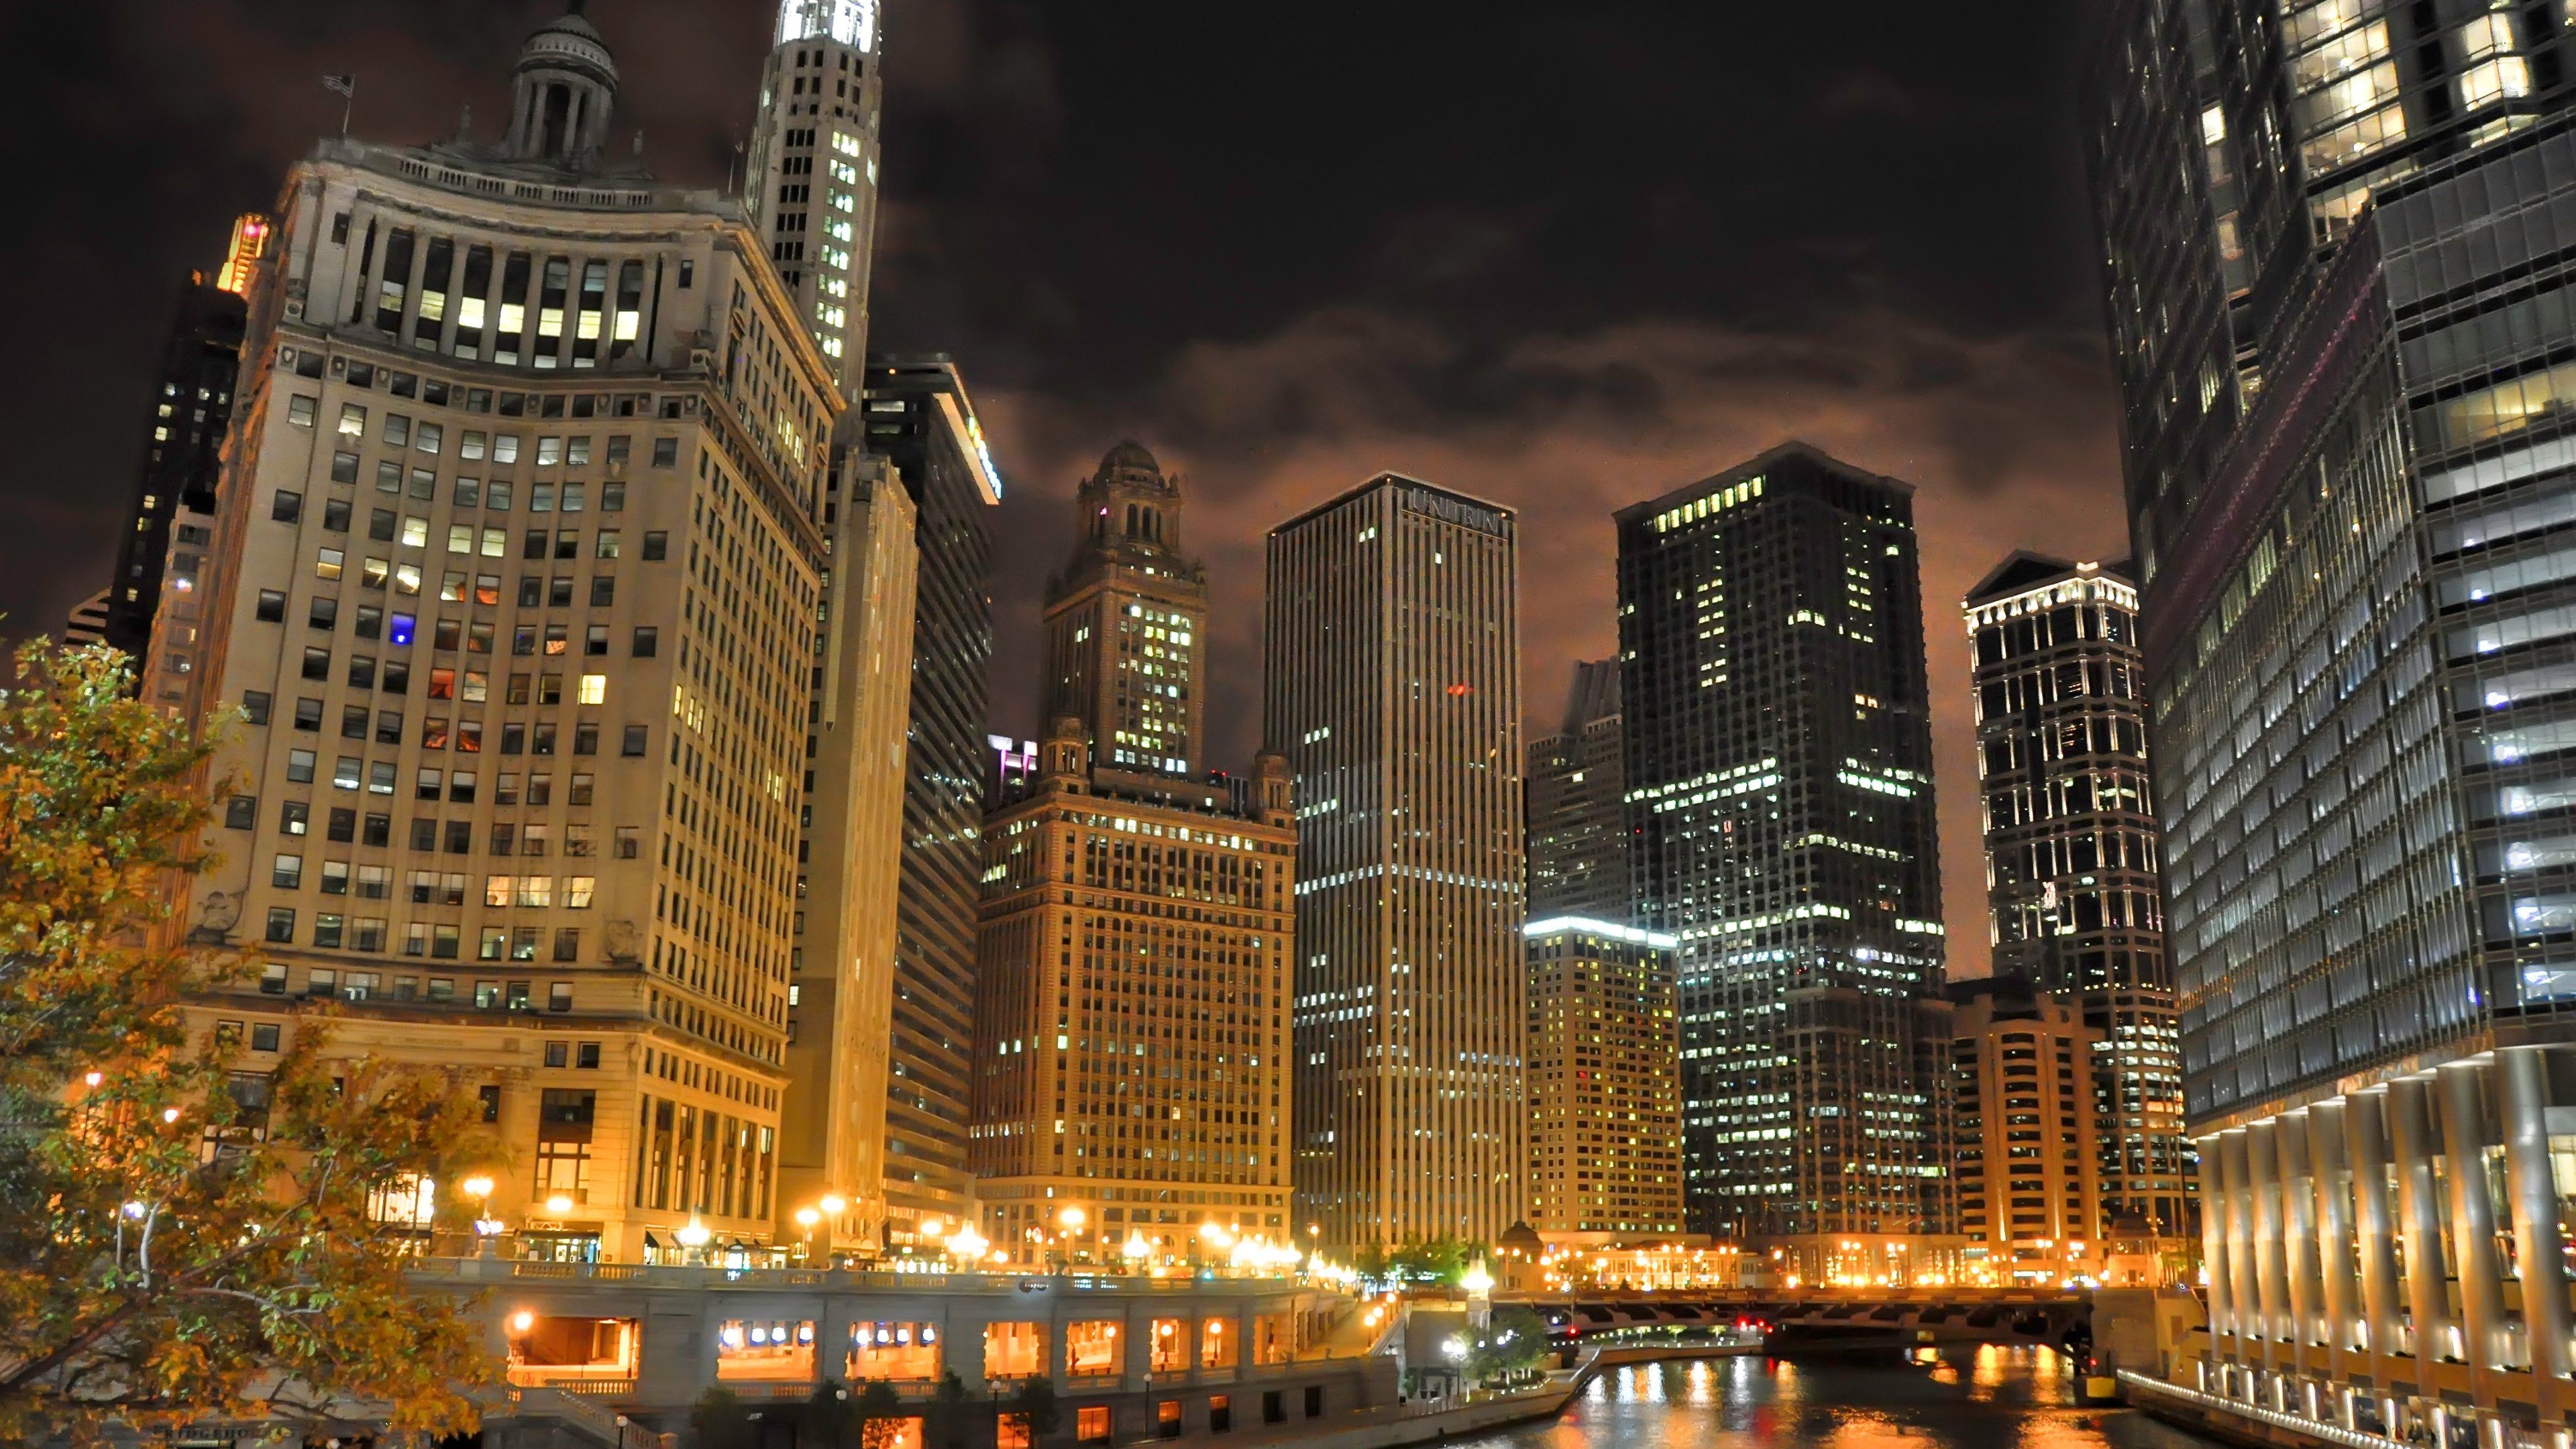 Chicago: The most populous city in the U.S. state of Illinois. 3840x2160 4K Background.